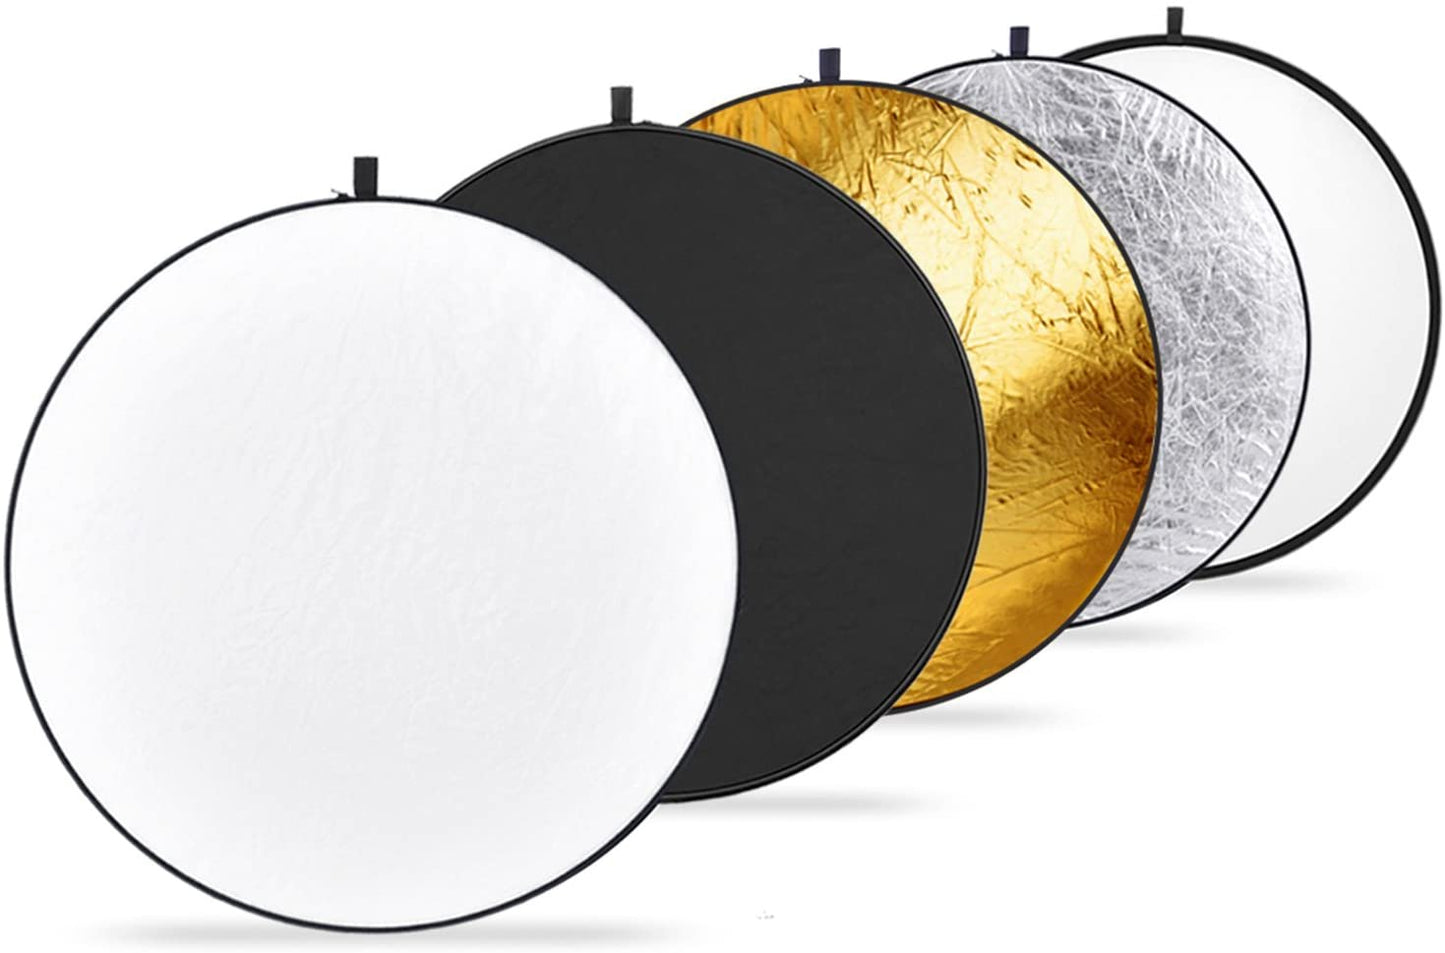 Pxel RF3 KIT Studio Reflector Set with 80cm 5-in-1 Round Reflector (Gold, Black, Silver, White), 60cm 2-in-1 Round Reflector (Silver and Gold) with Stand Support